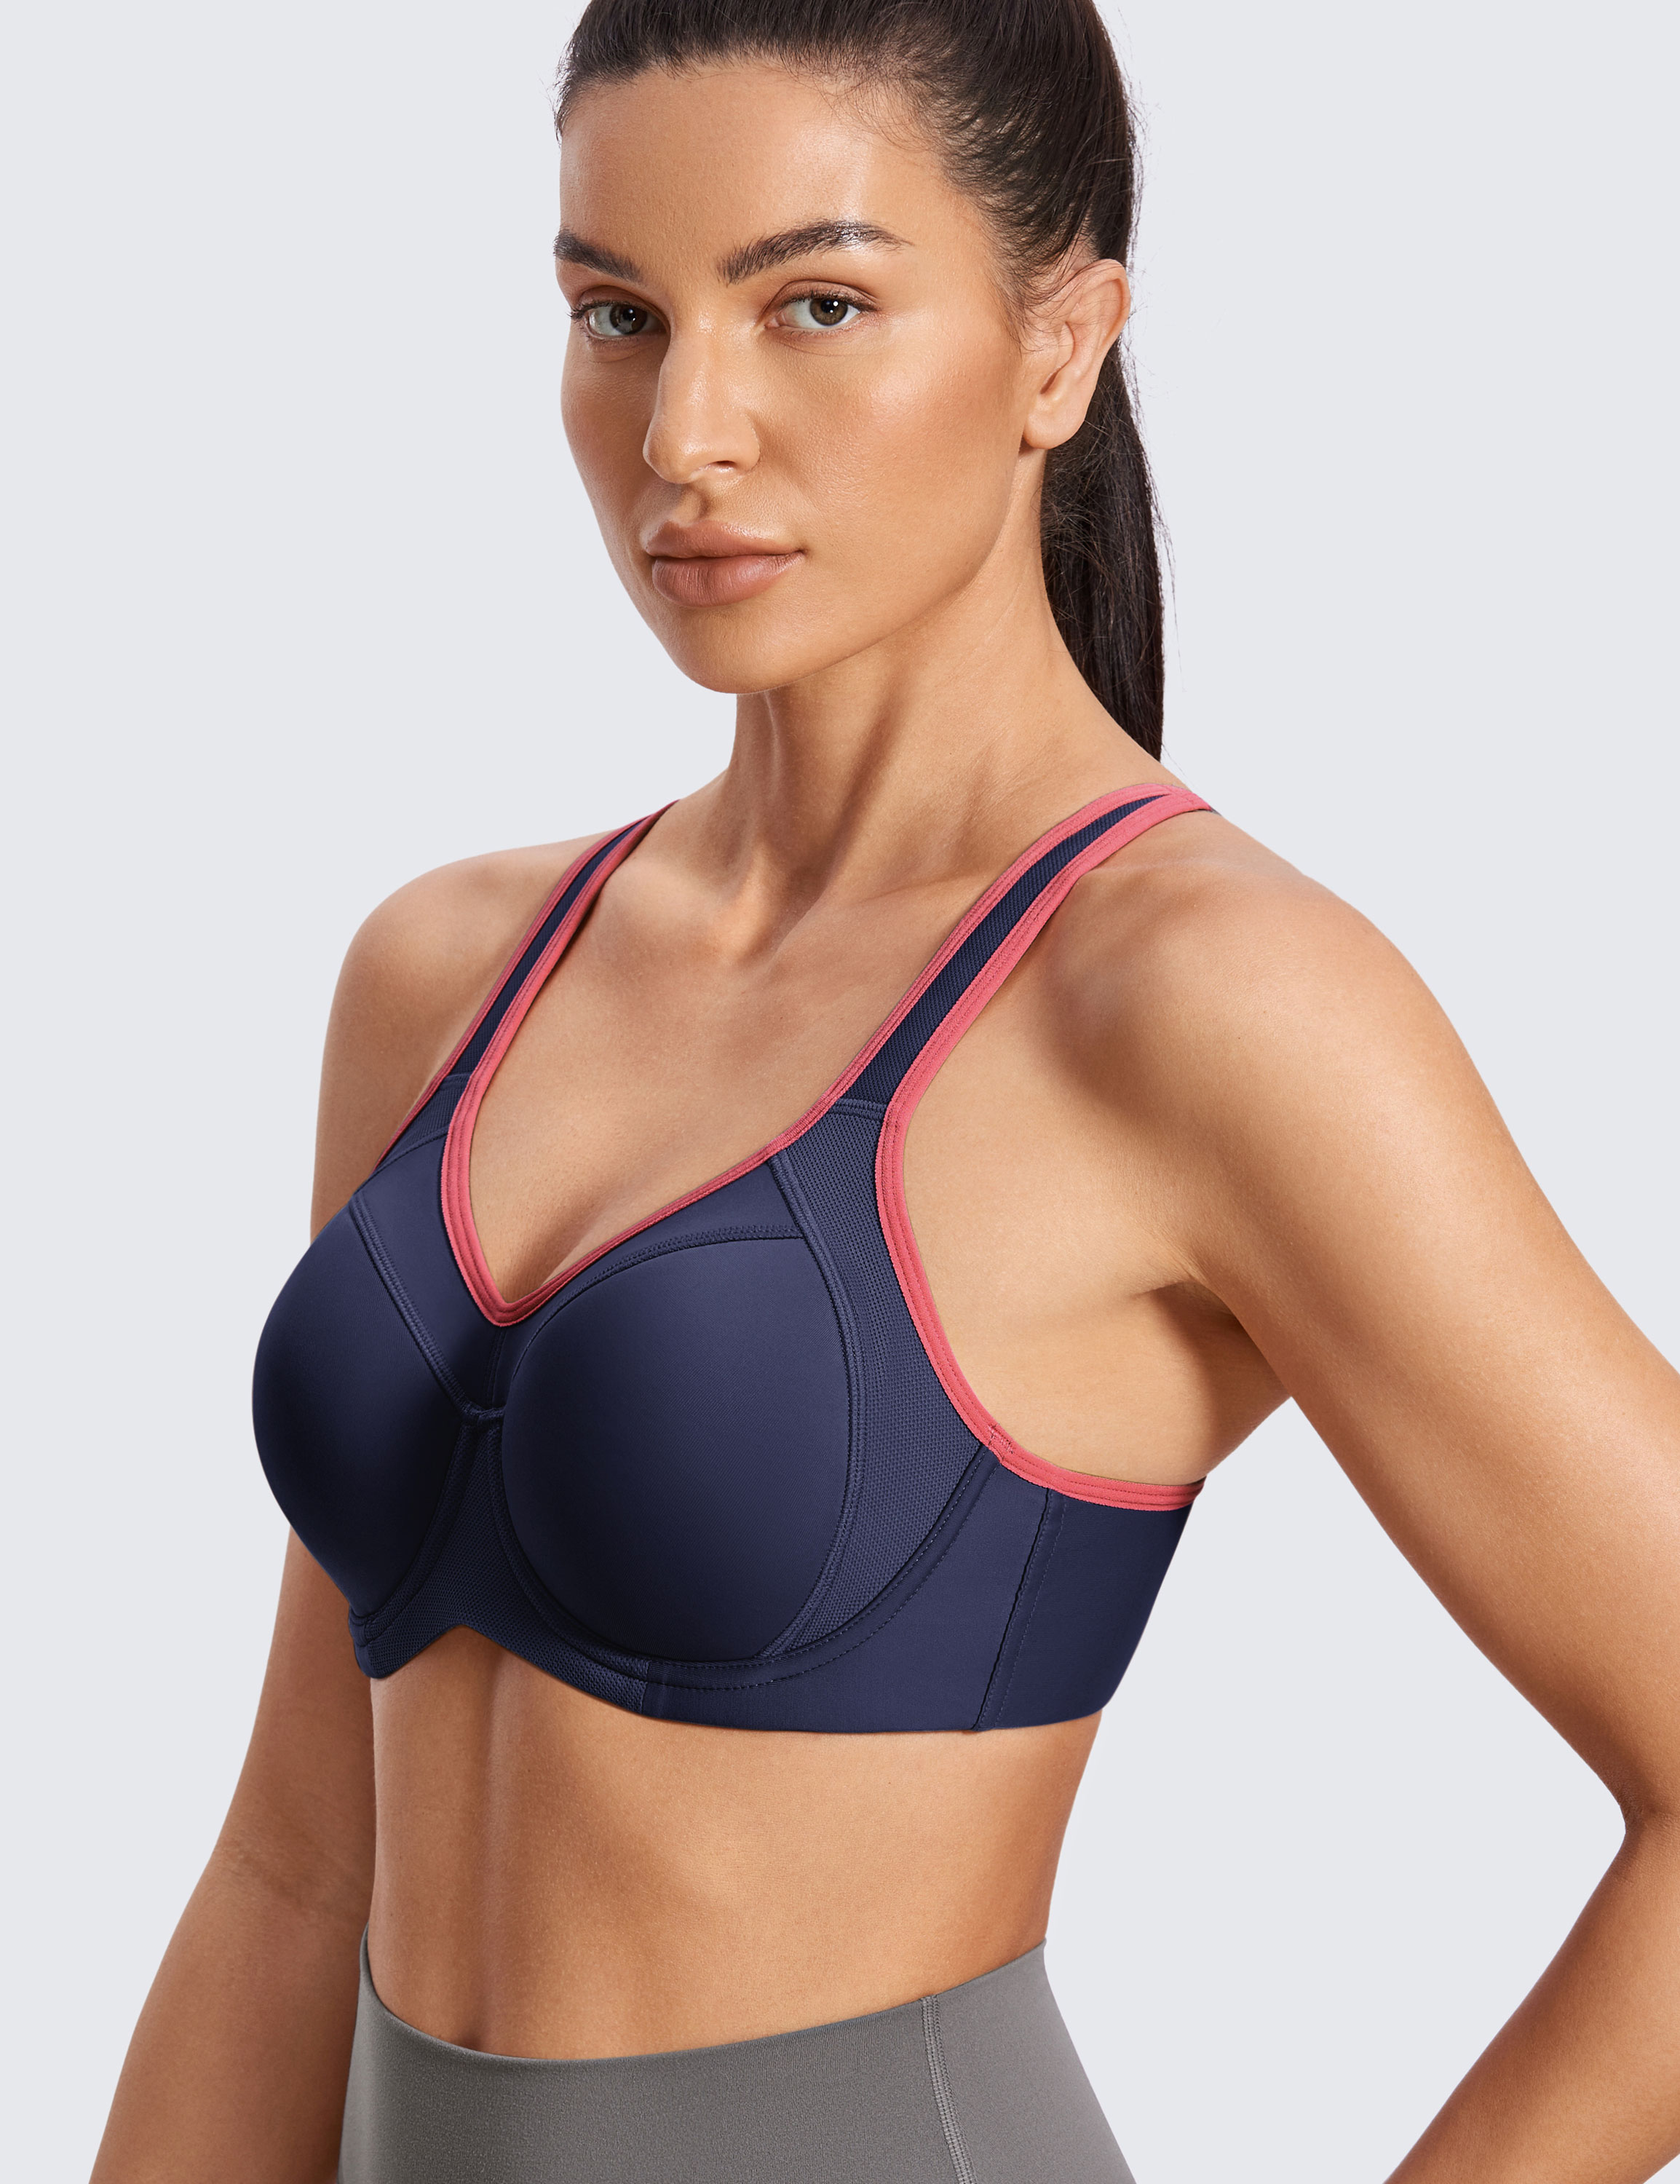 SYROKAN Women's Full Support Sports Bra High Impact Lightly Lined Underwire